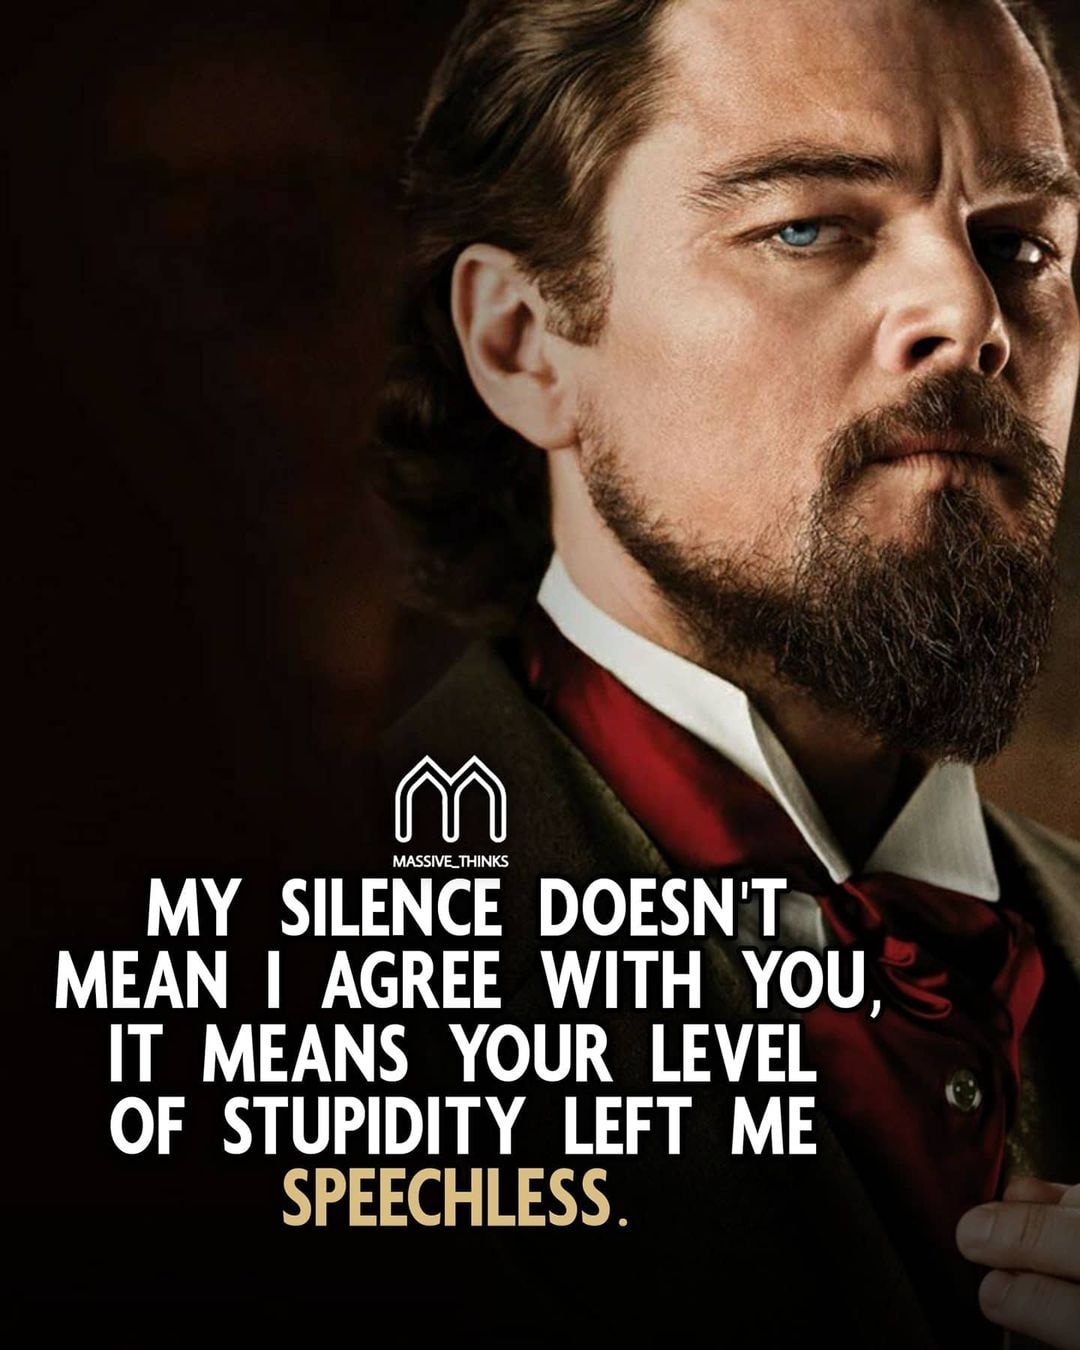 My Silence Doesn’t Mean I Agree with You. It Means Your Level of Stupidity Rendered Me Speechless